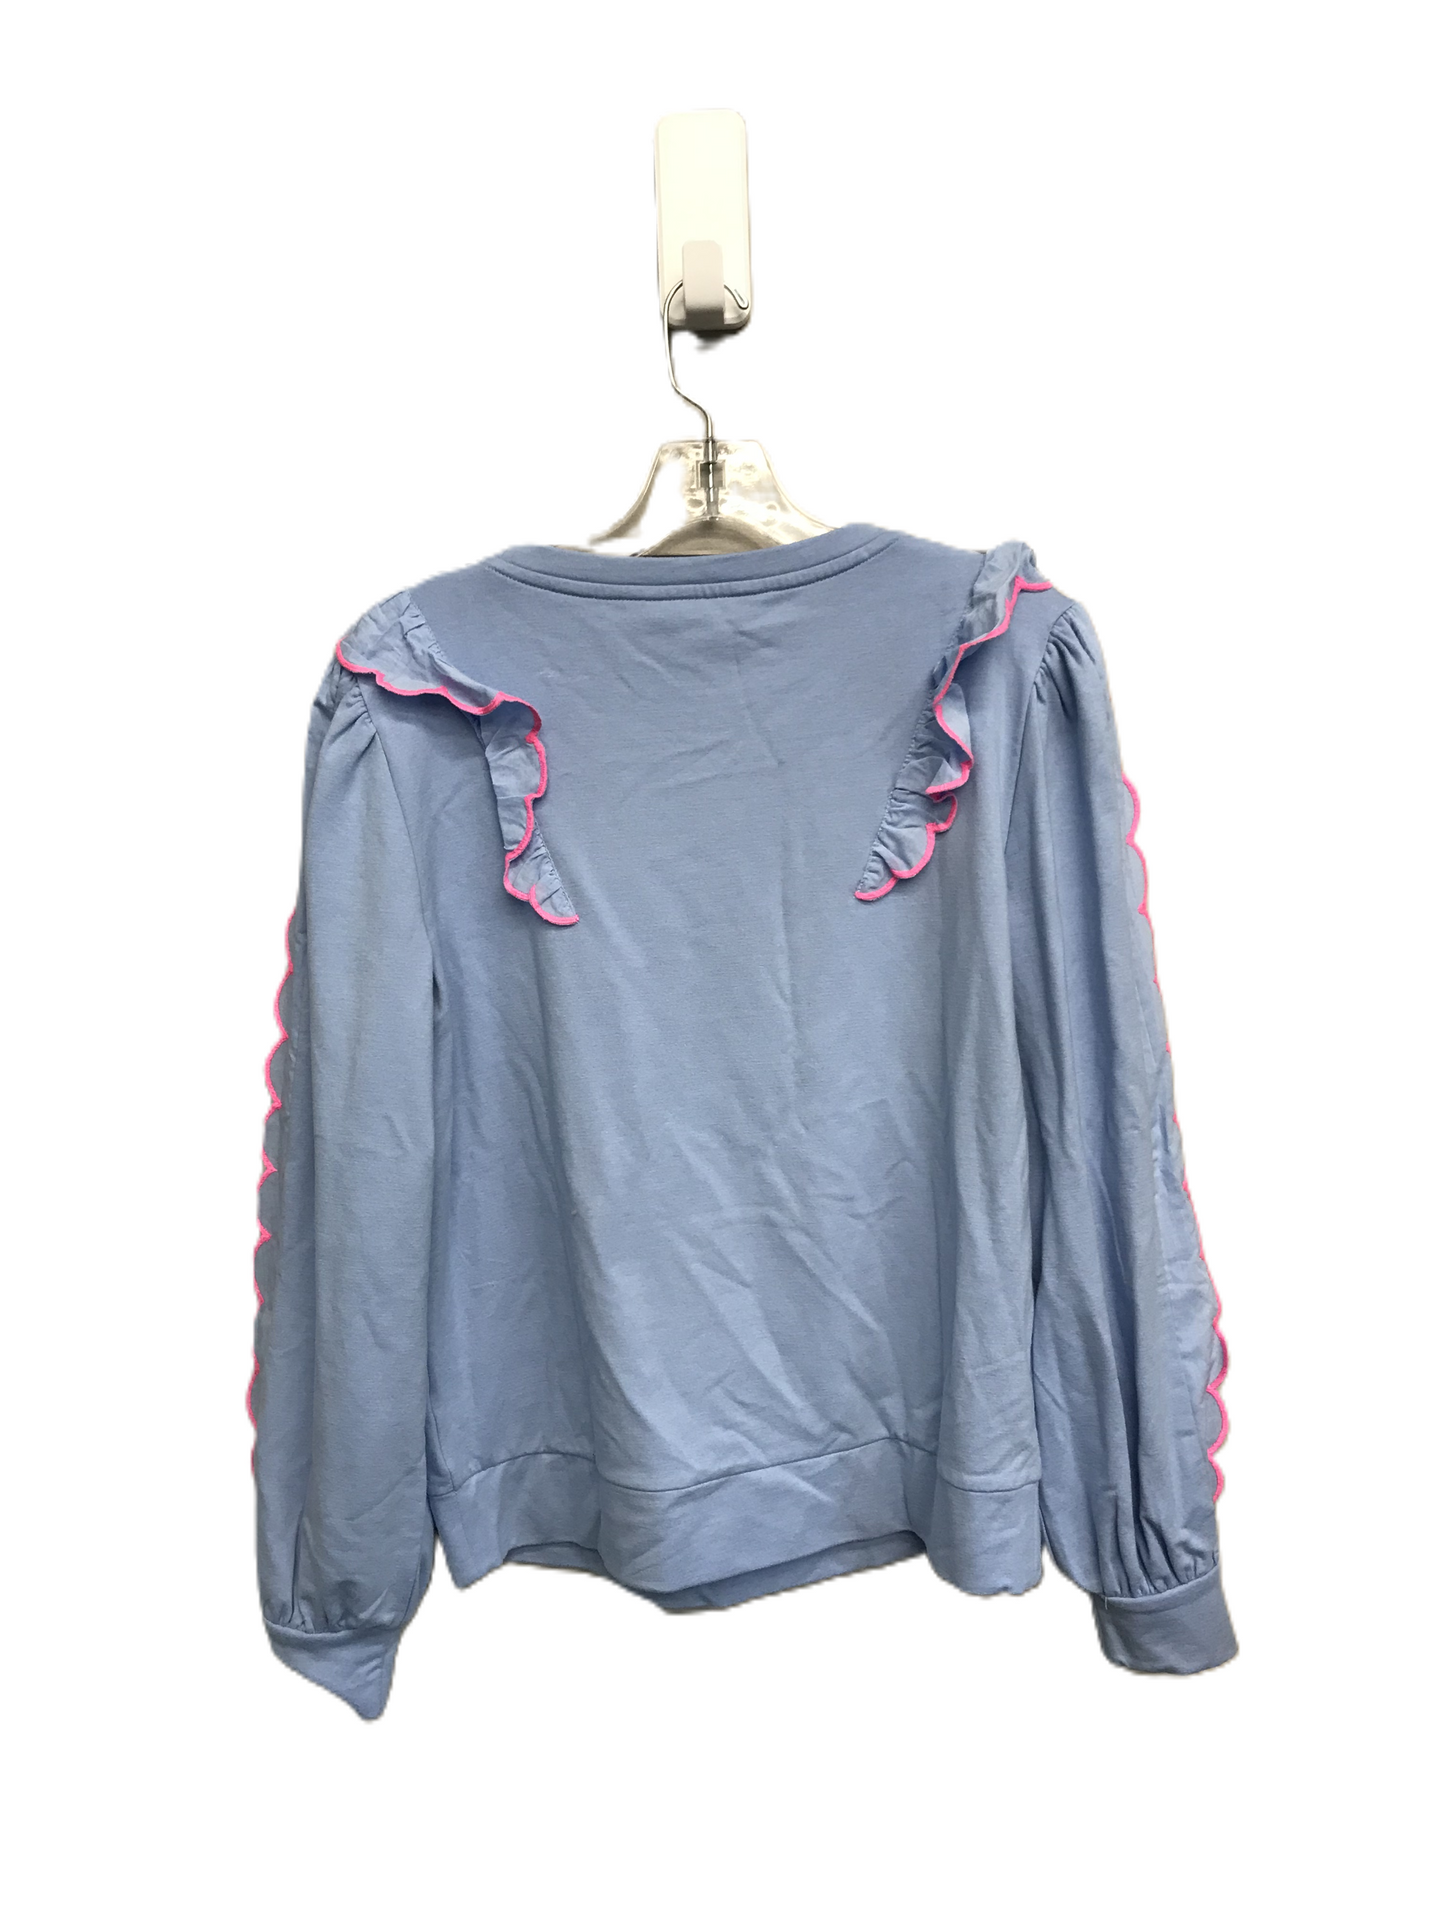 Blue & Pink Top Long Sleeve By Lilly Pulitzer, Size: S